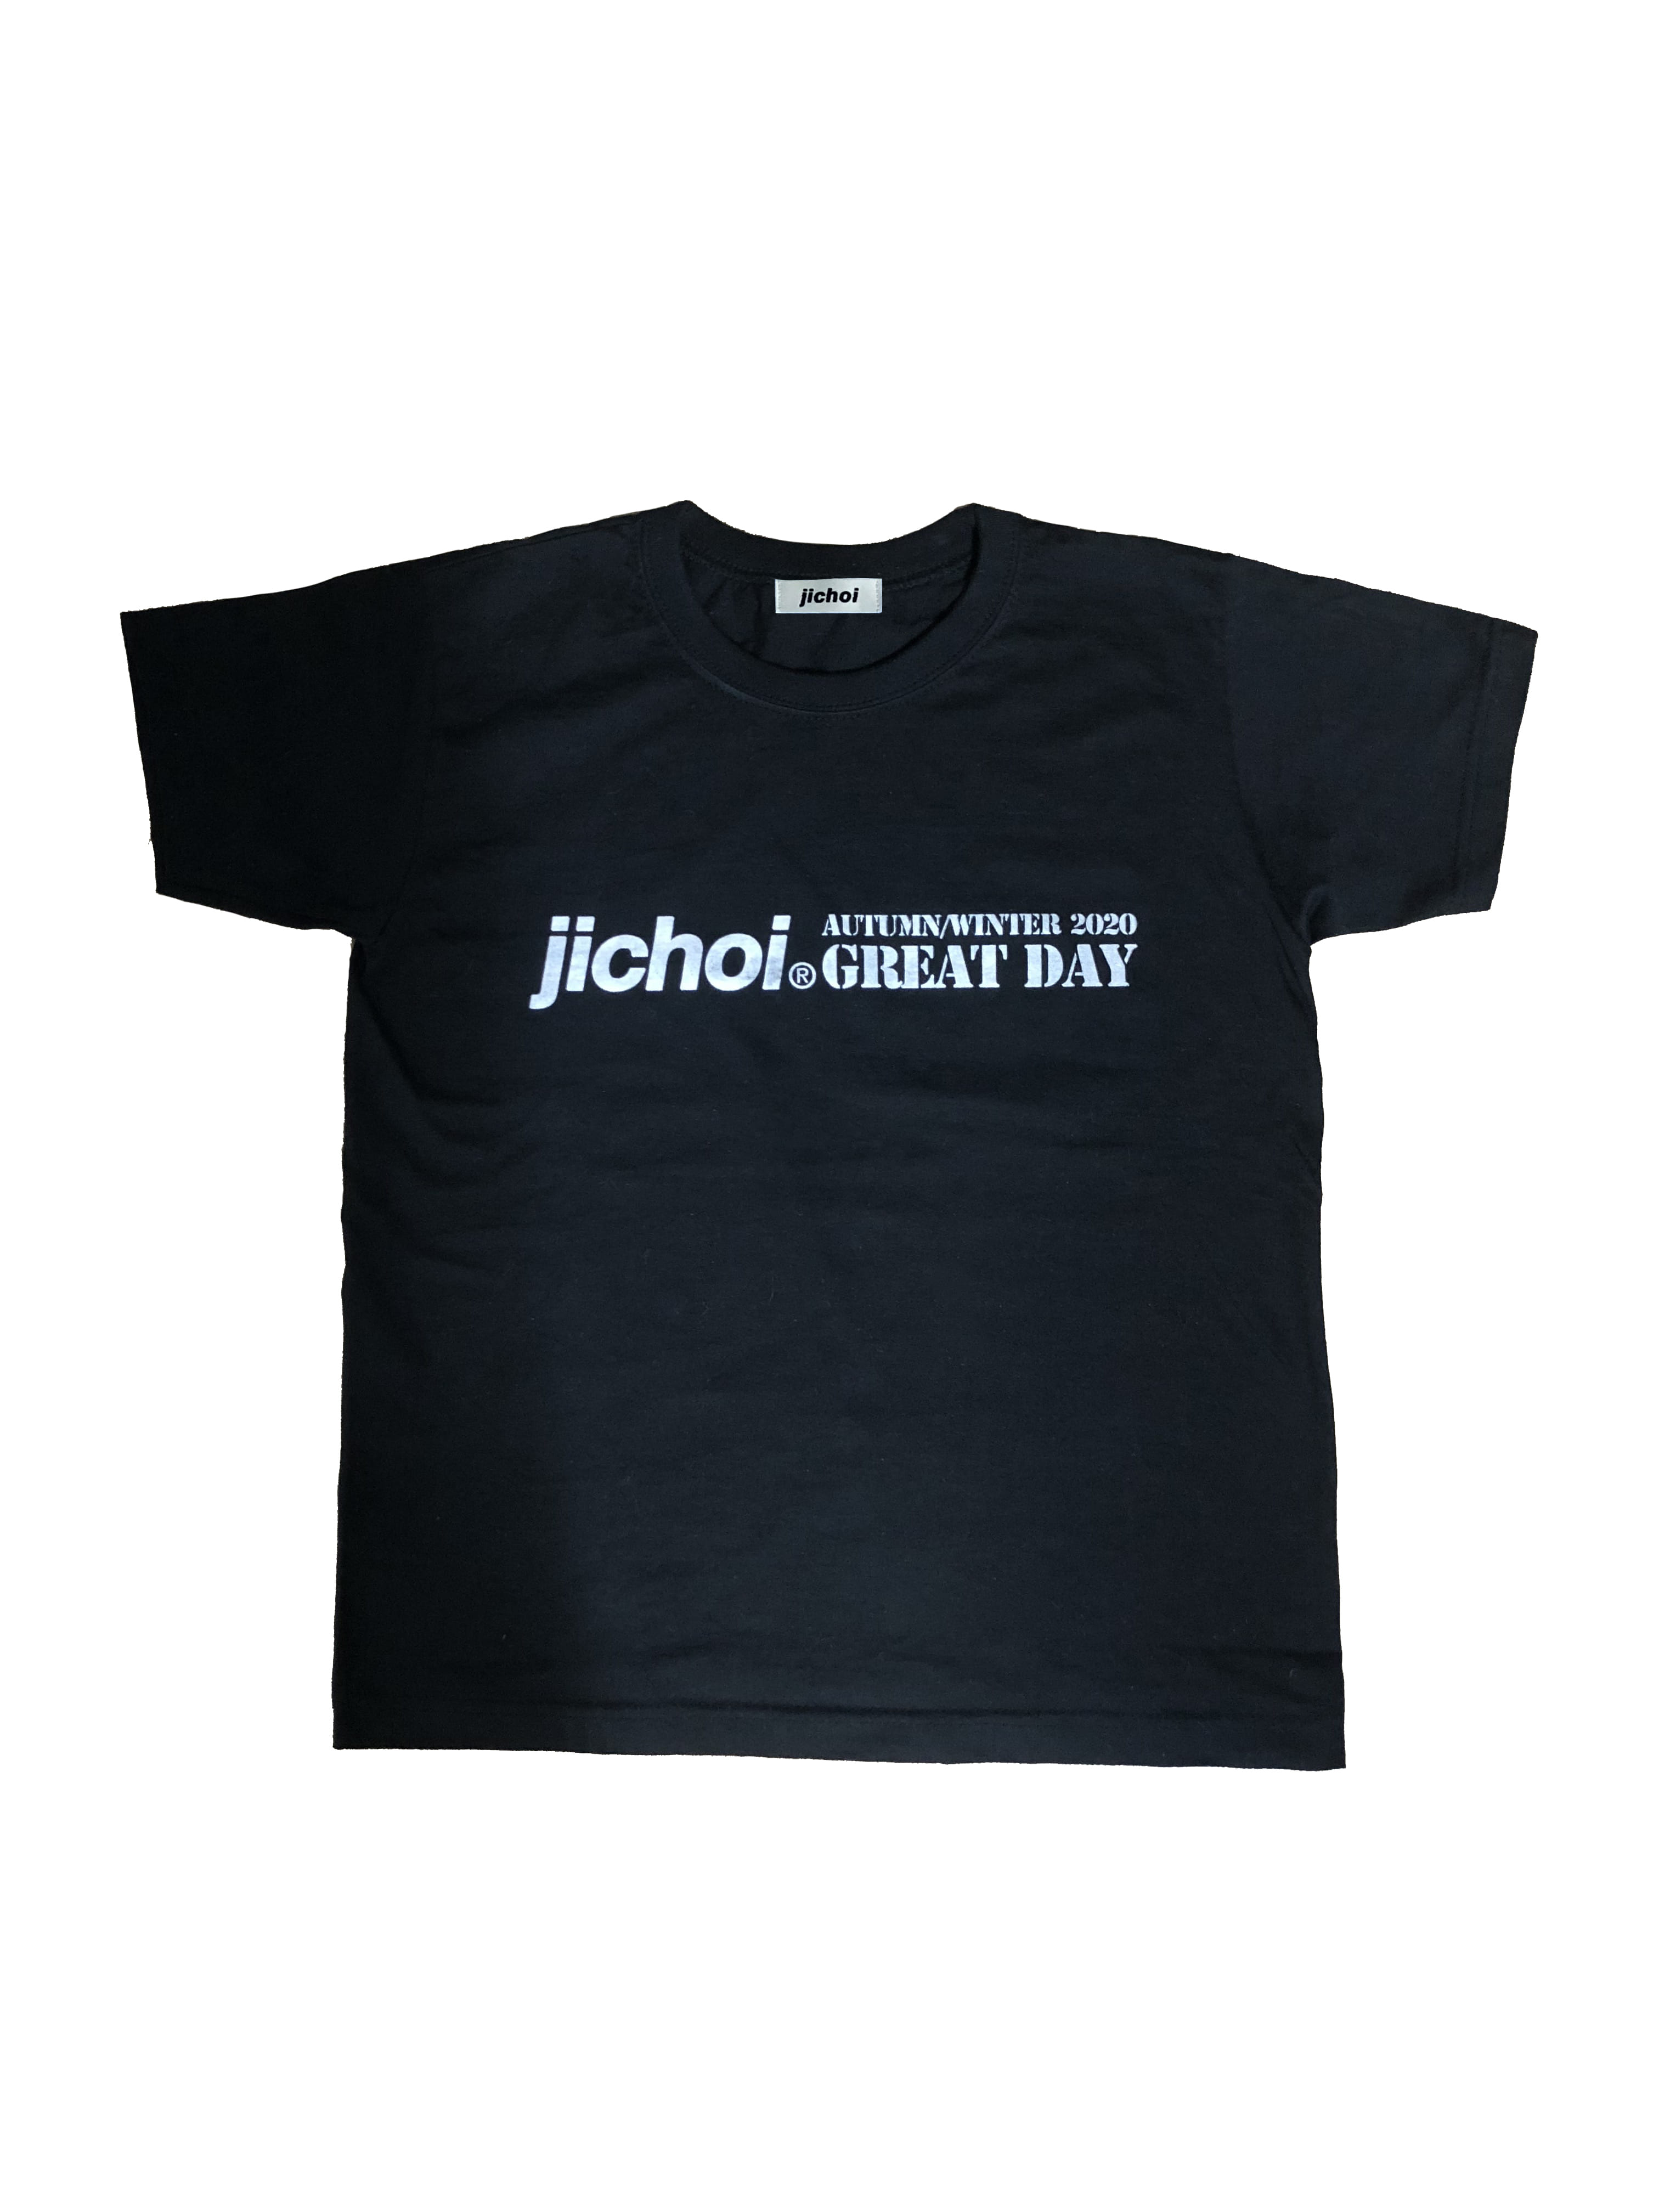 AW20 GREAT DAY T-SHIRT (BLACK)